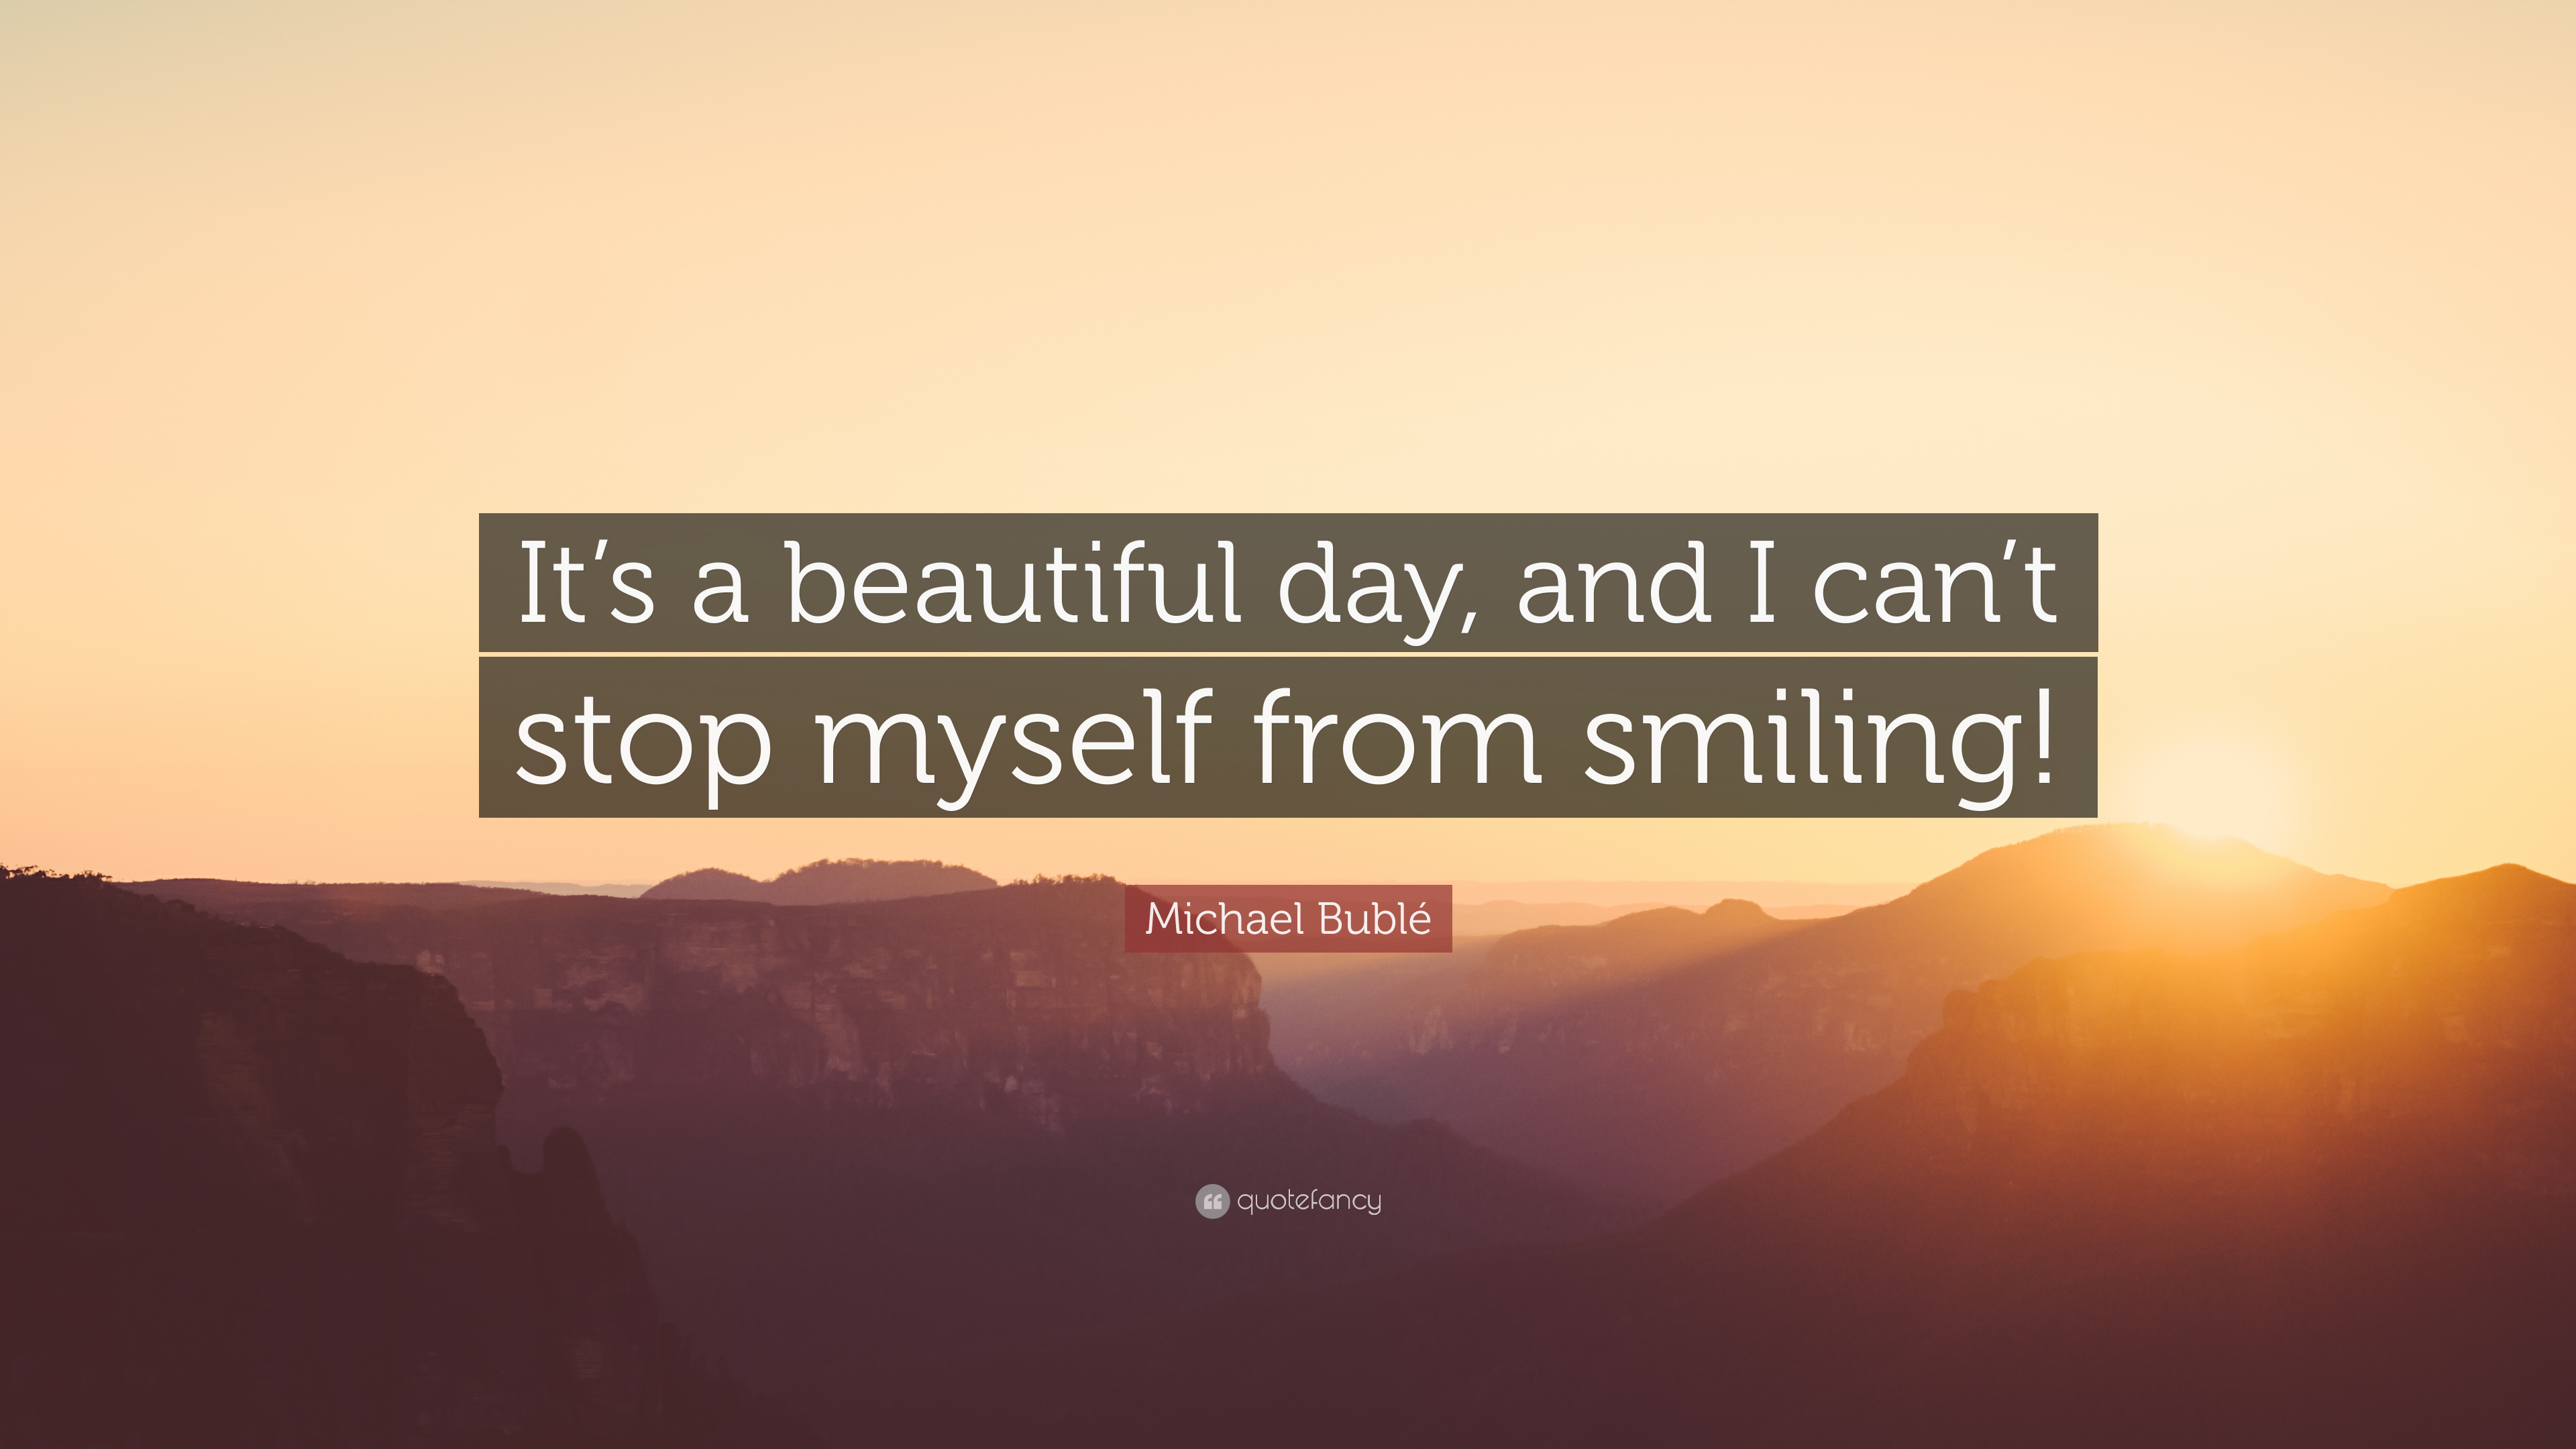 Michael Bublé Quote: “It's a beautiful day, and I can't stop